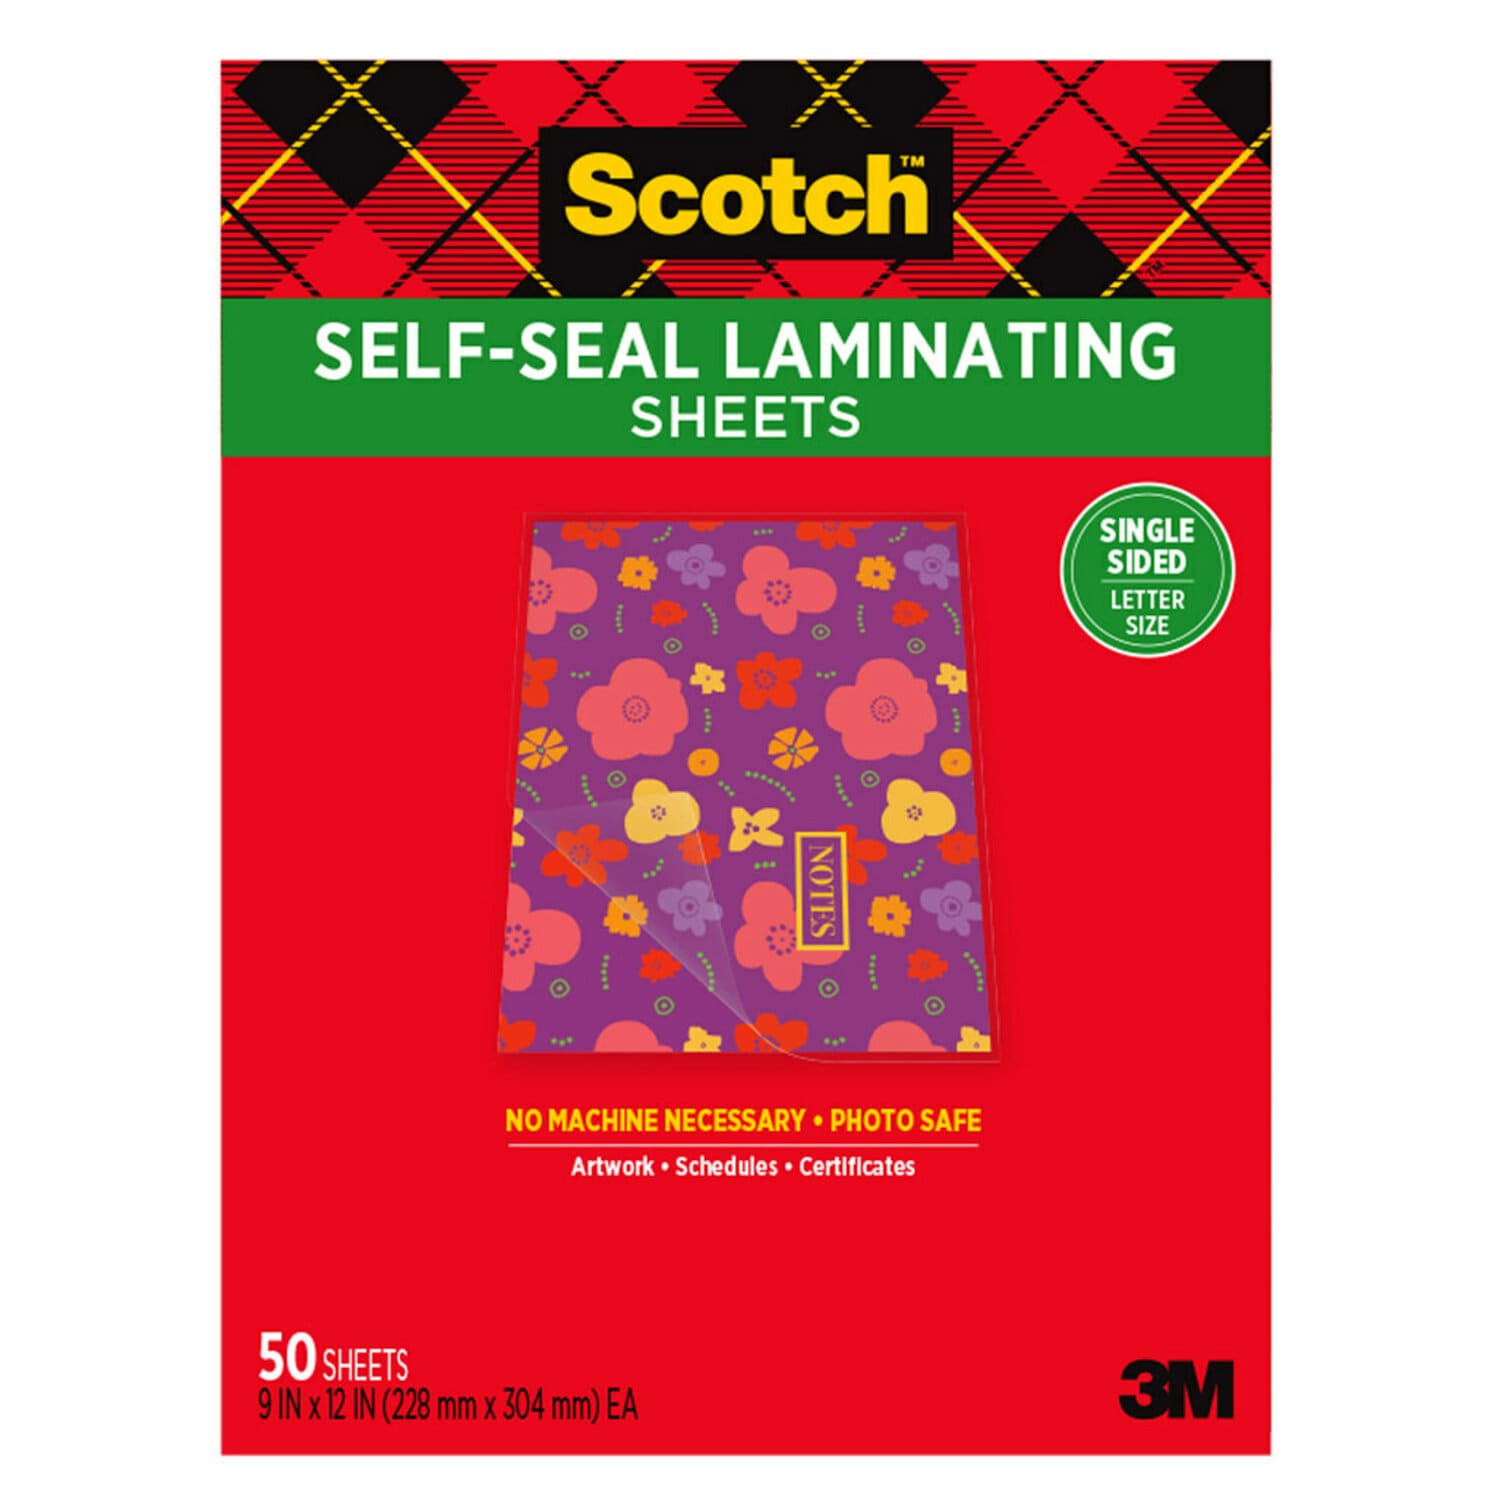 7010311374 - Scotch Laminating Sheets LS854SS-50, 9 in x 12 in (228 mm x 304 mm)
Letter Size Single Sided